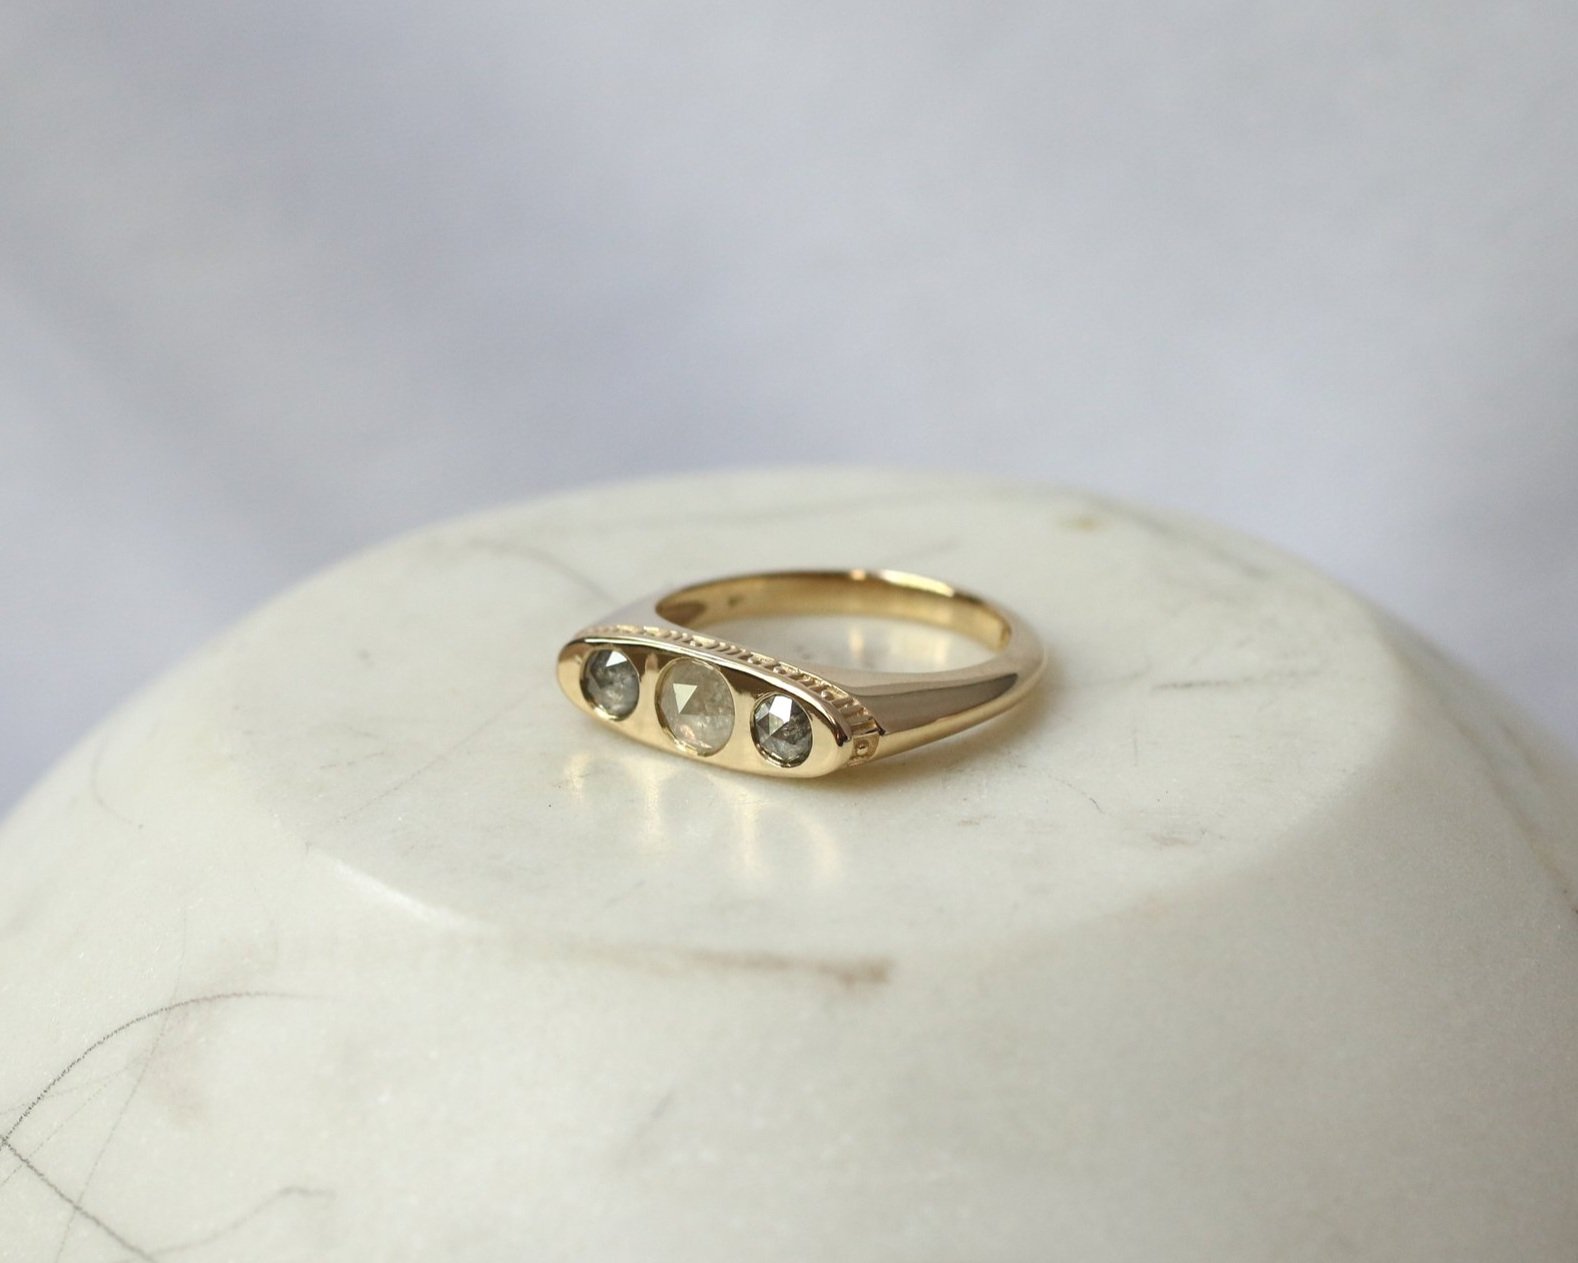 Don Mother's Ring - icy white + salt n' pepper rose cut diamonds + 14k yellow gold